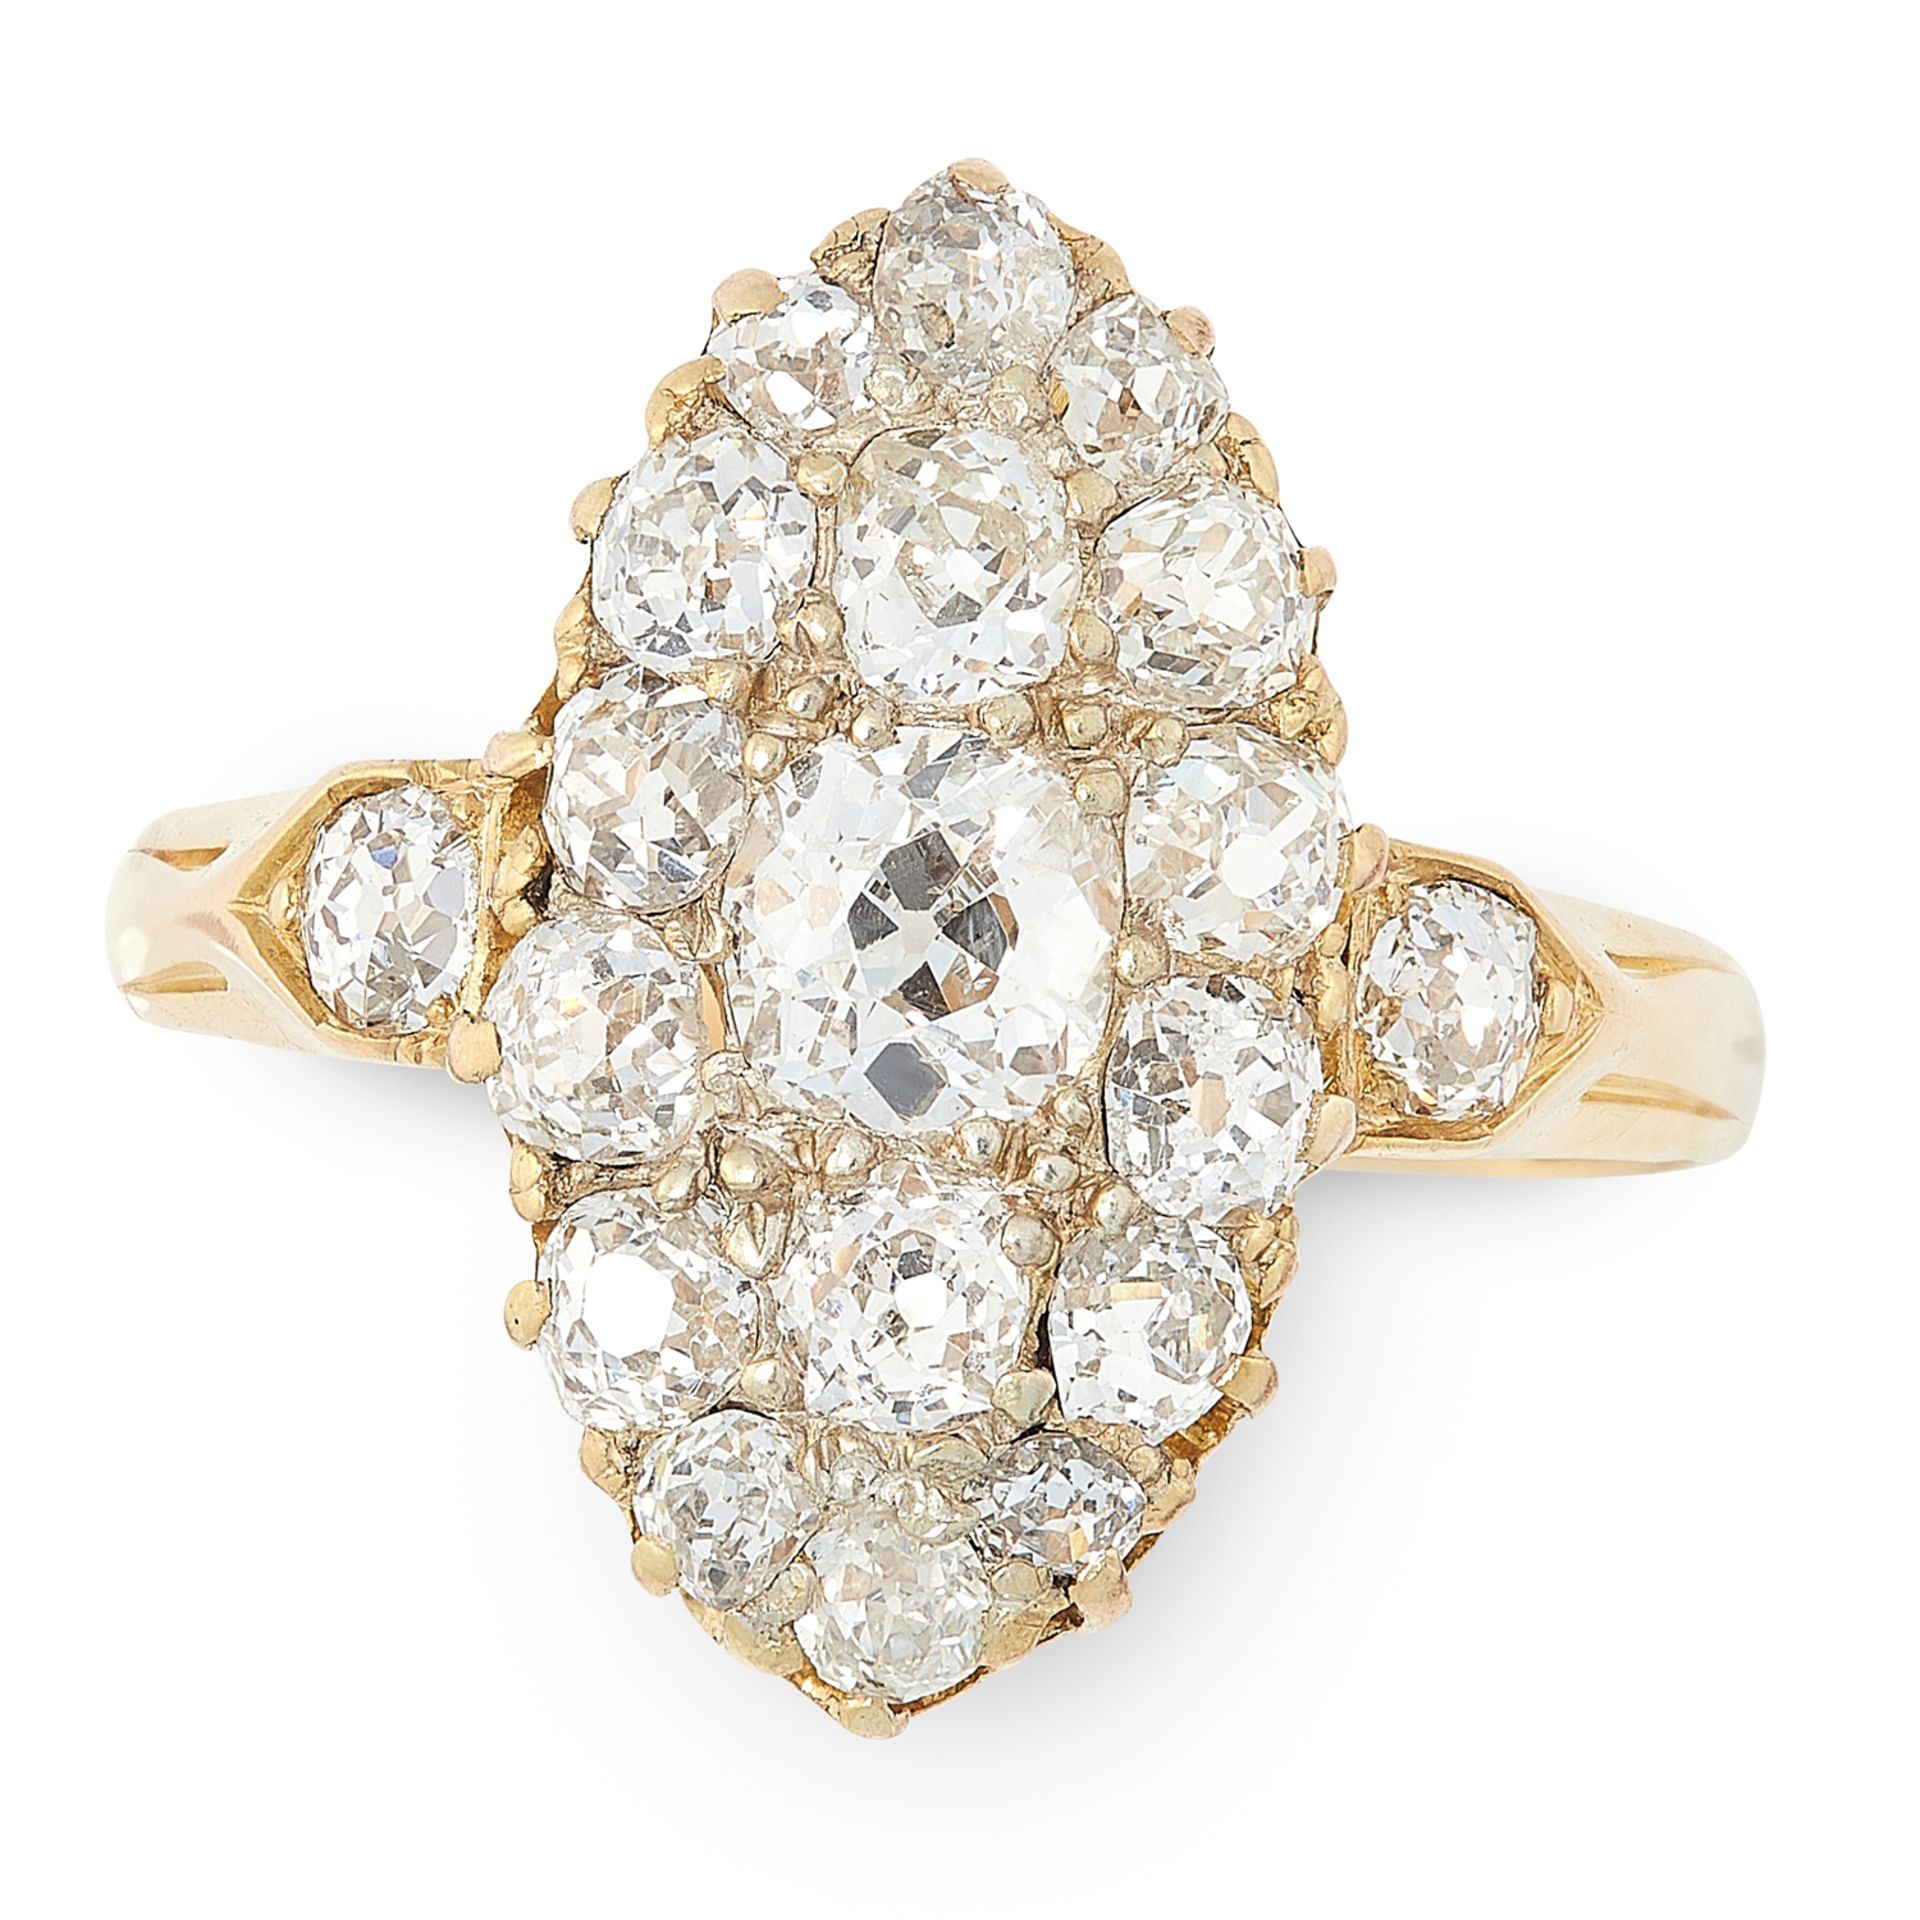 AN ANTIQUE DIAMOND CLUSTER RING in high carat yellow gold, the navette face set with a cluster of